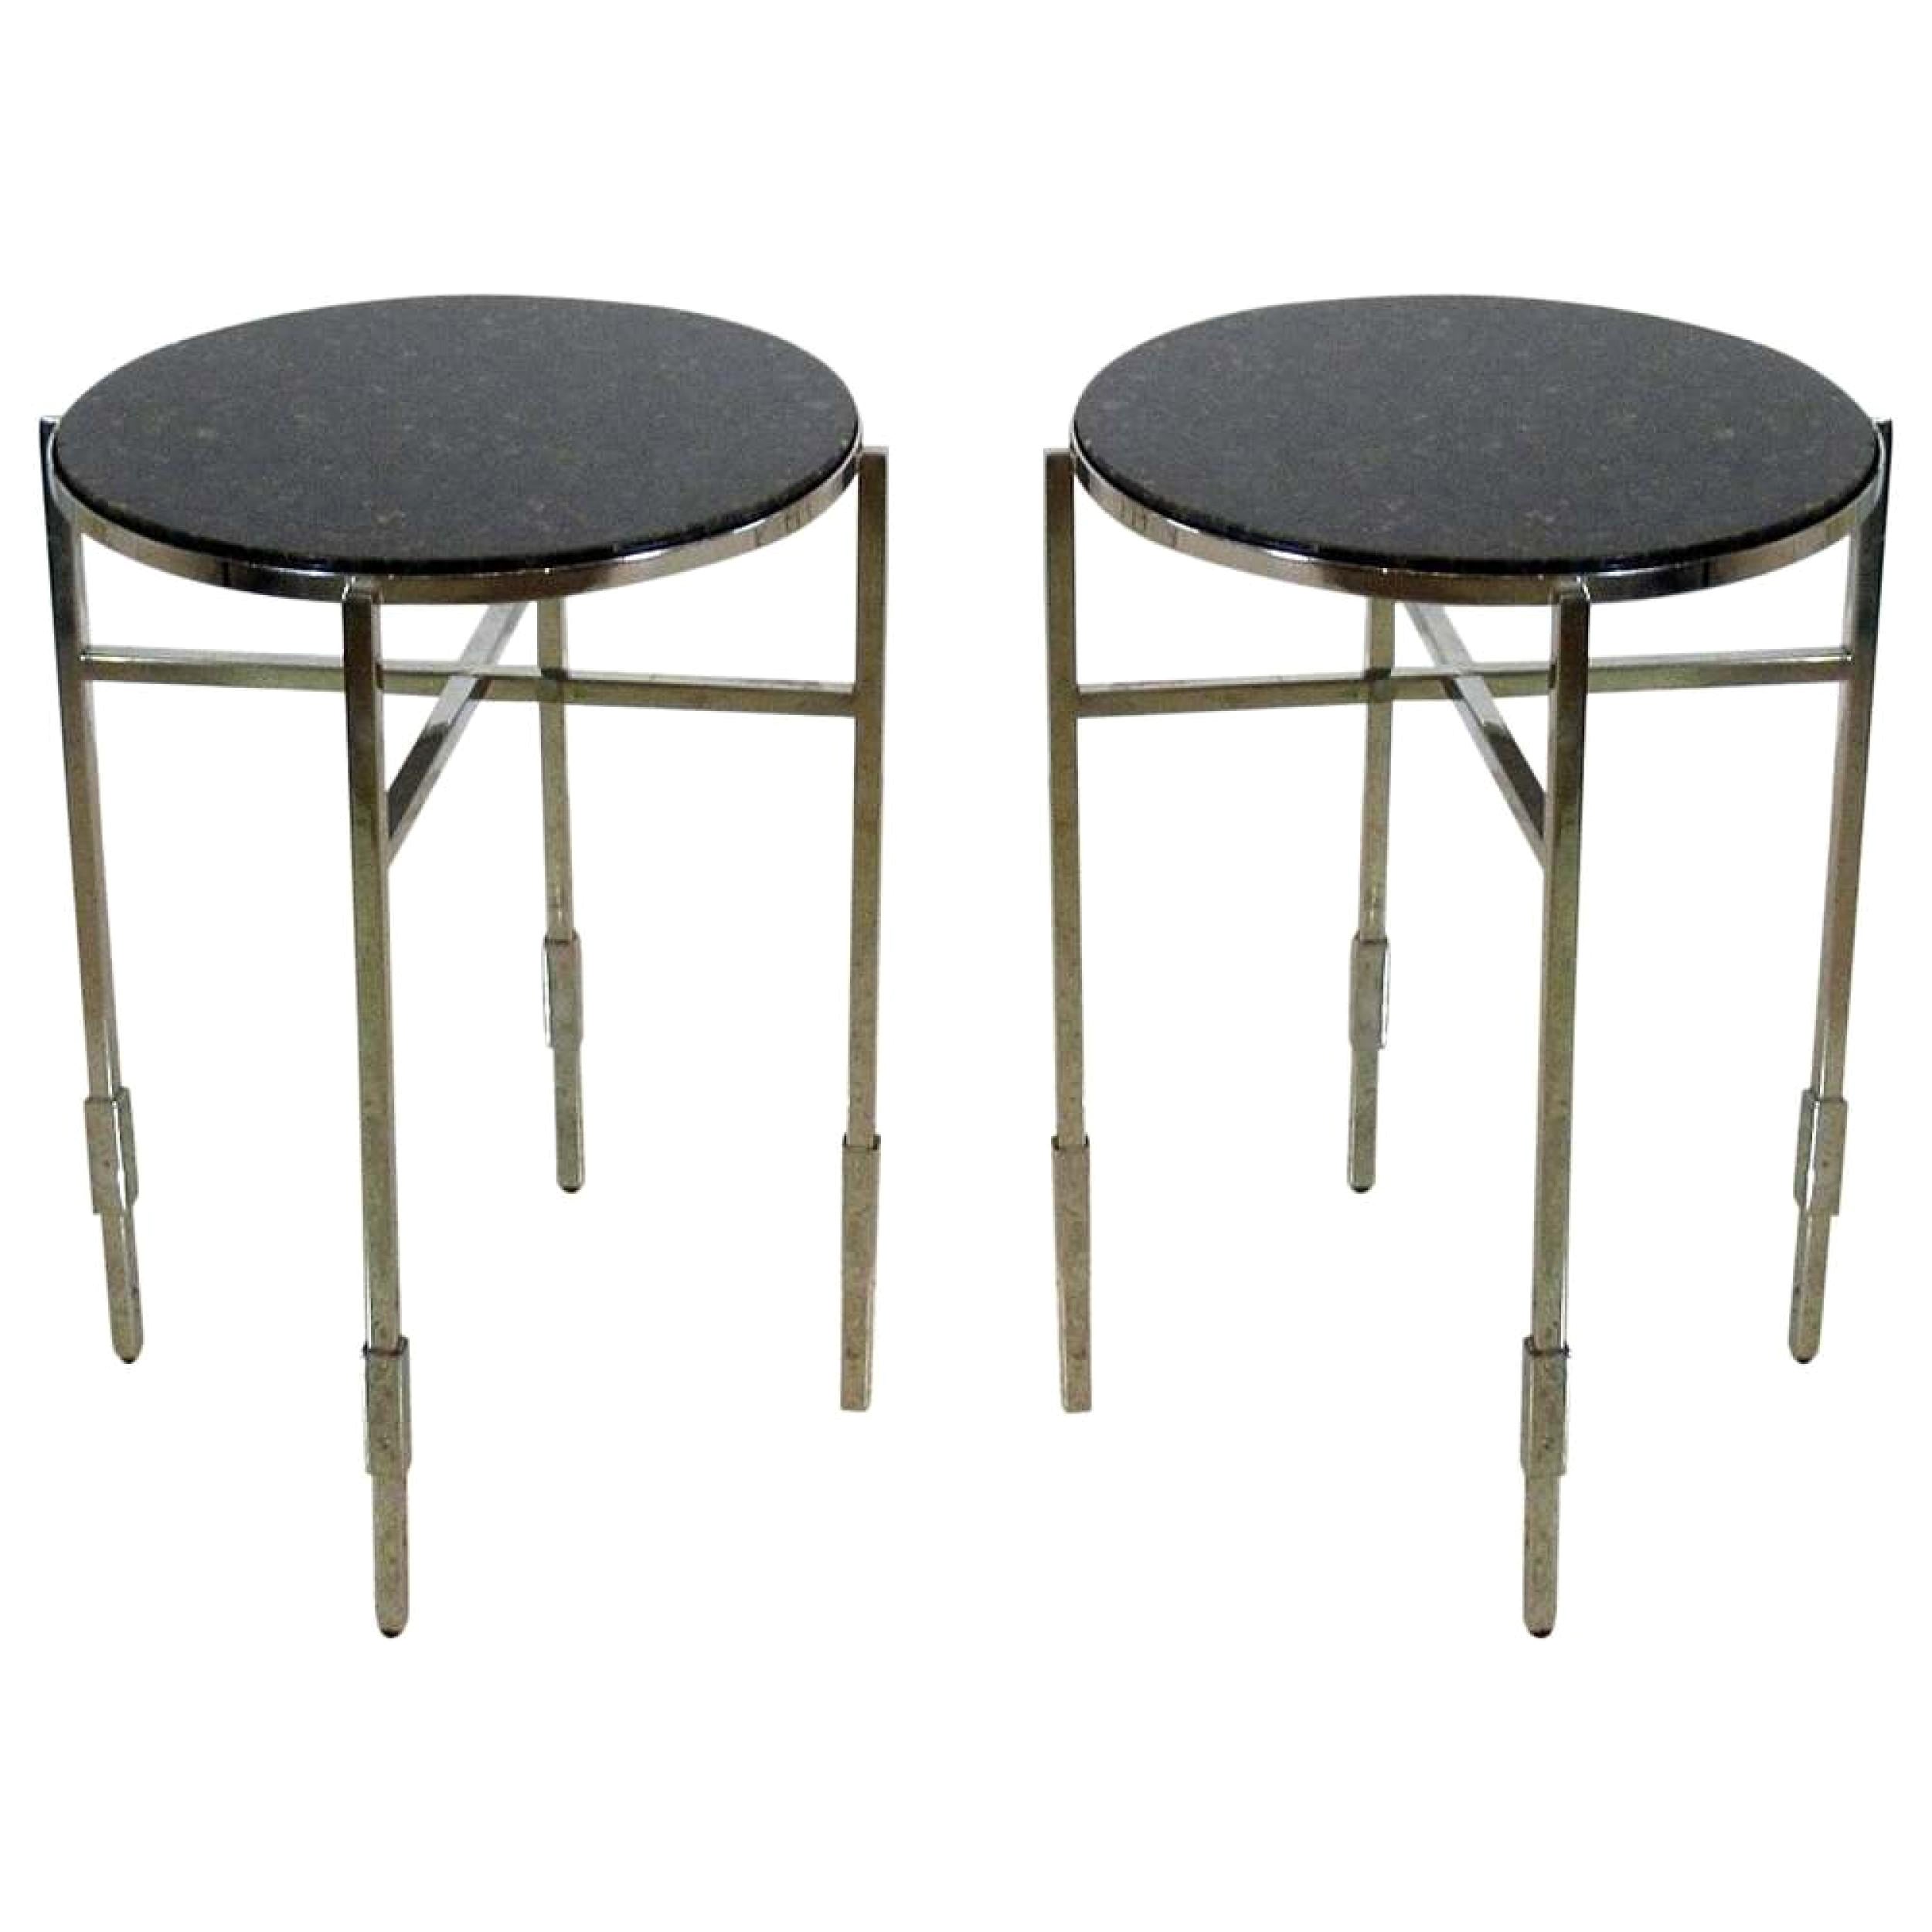 Pair of Michael Graves American Modern Granite & Polished Chrome End/Side Tables